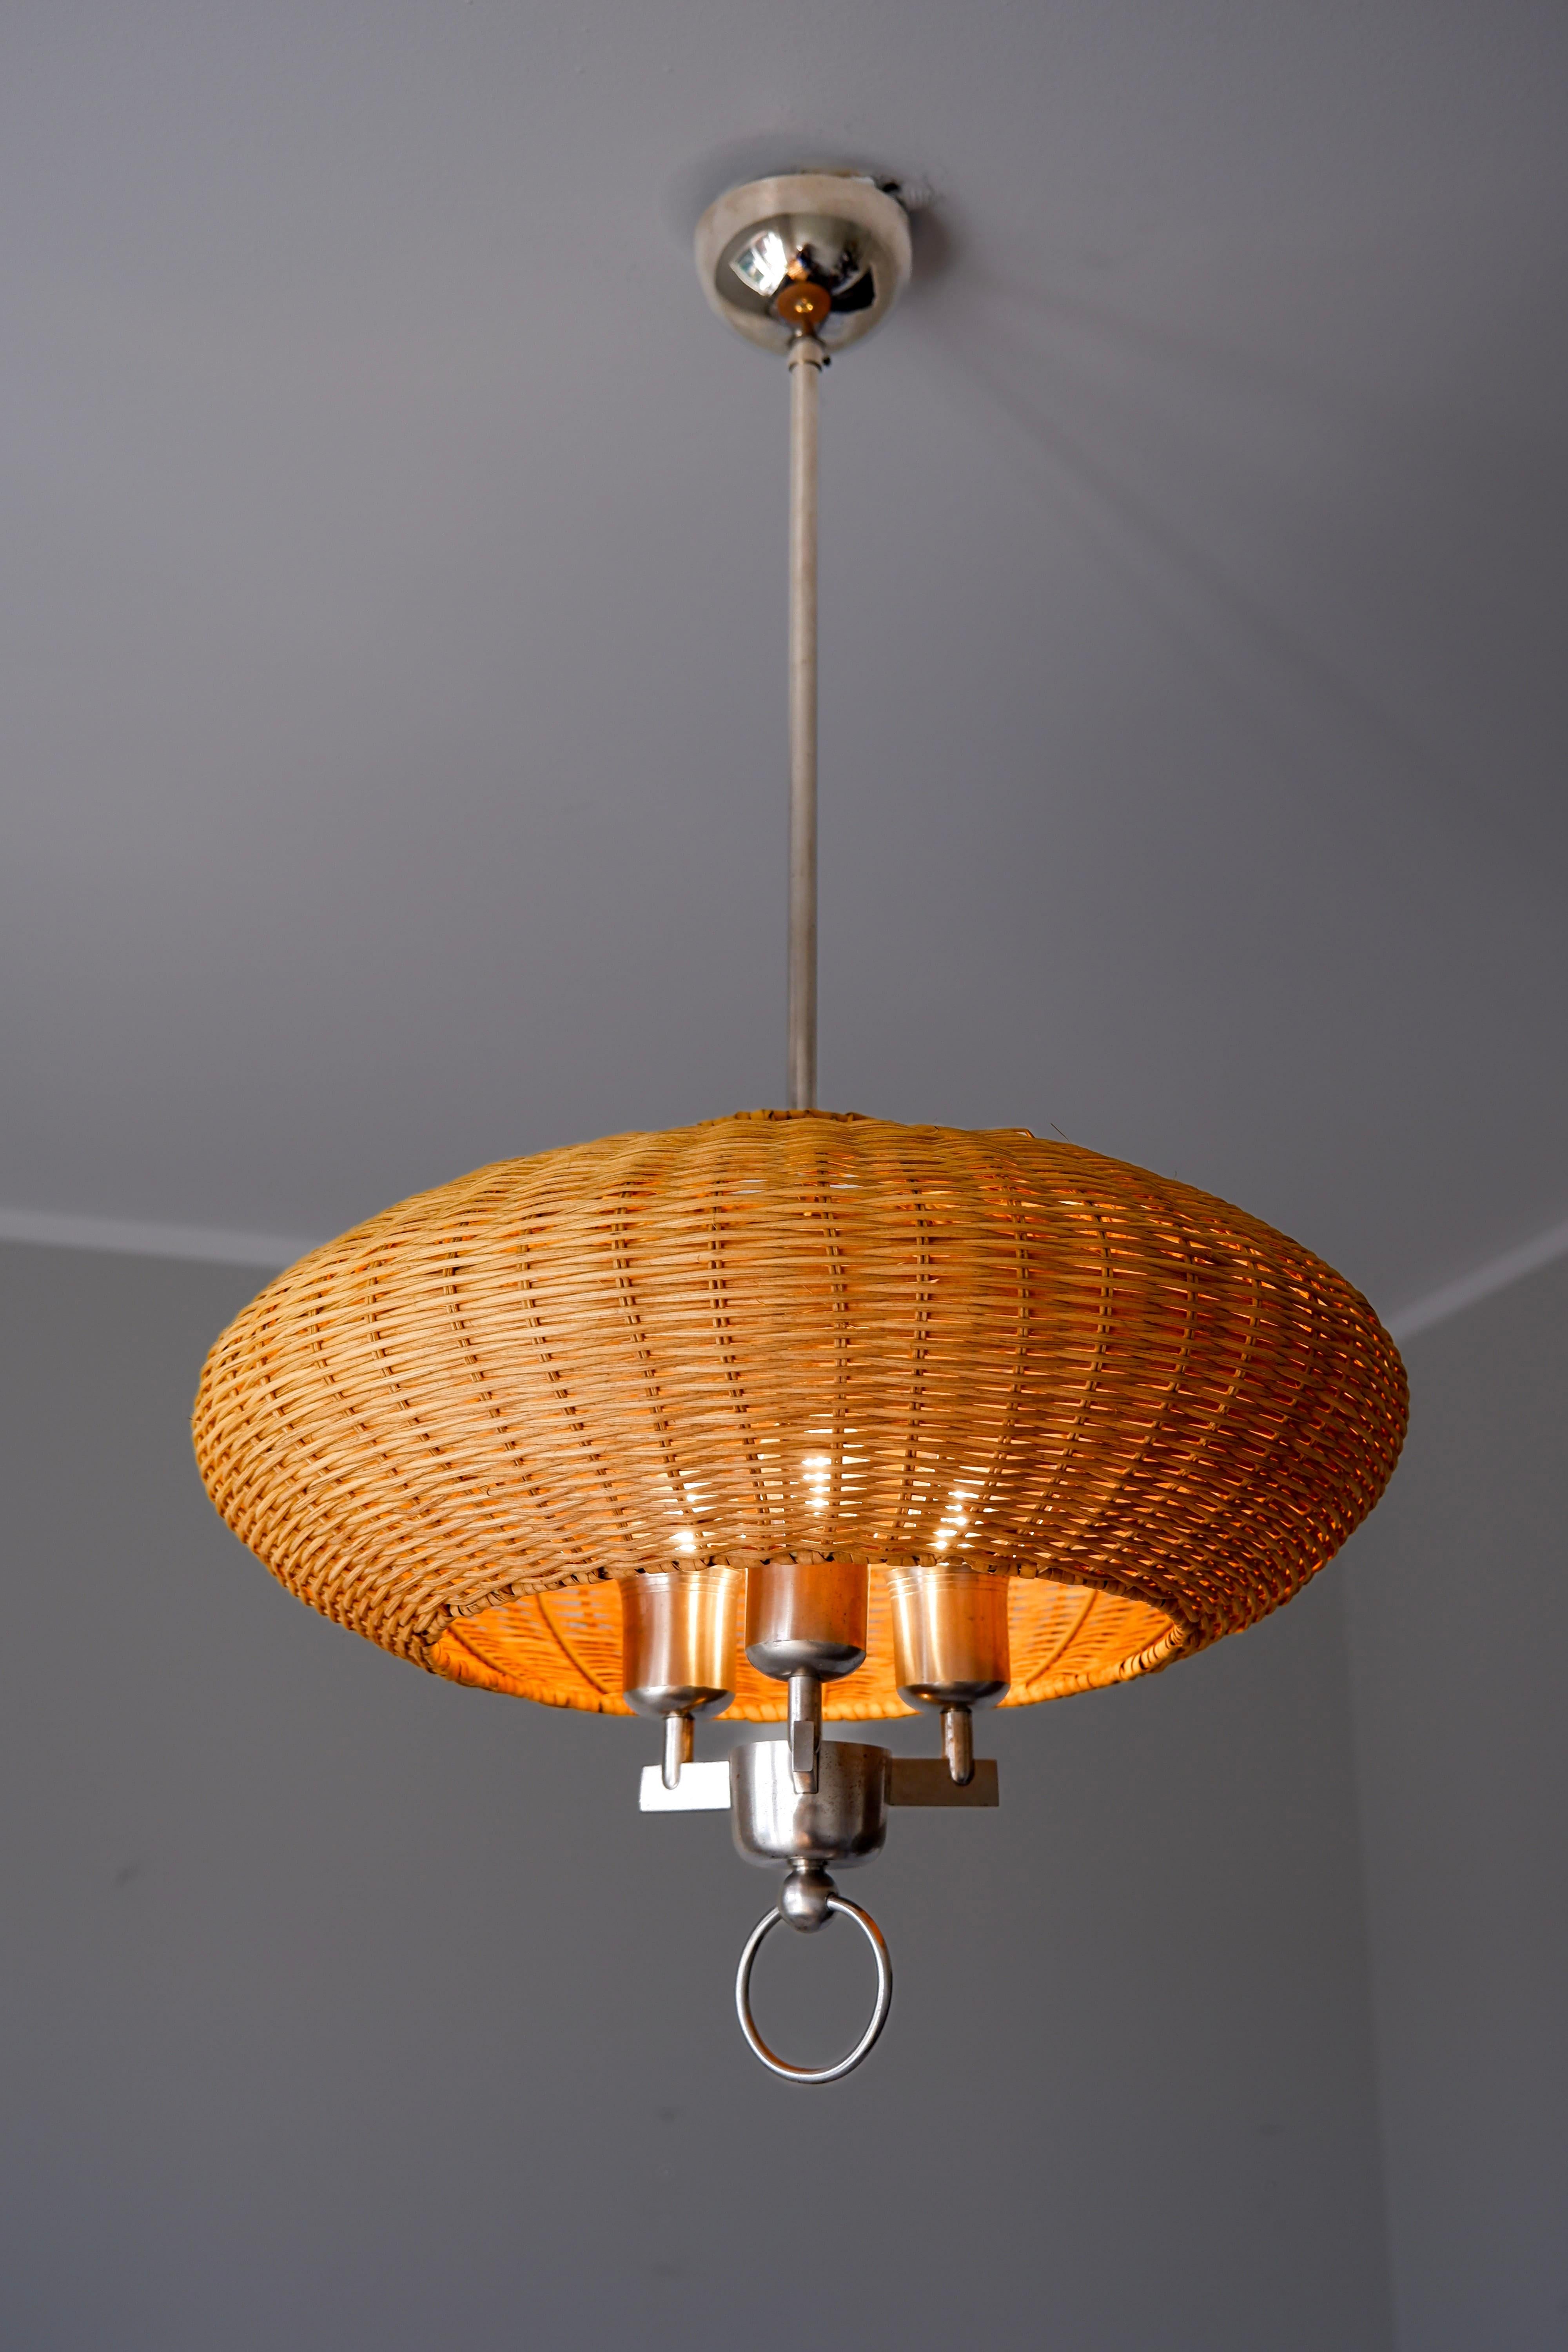 Paavo Tynell ceiling lamp made by Taito in the 40s. The lamp is made in Nikel plated brass with a wood strip shade which has been restored from the original one. This model is one of the first ever design by Paavo Tynell during the 40s. The lamp is